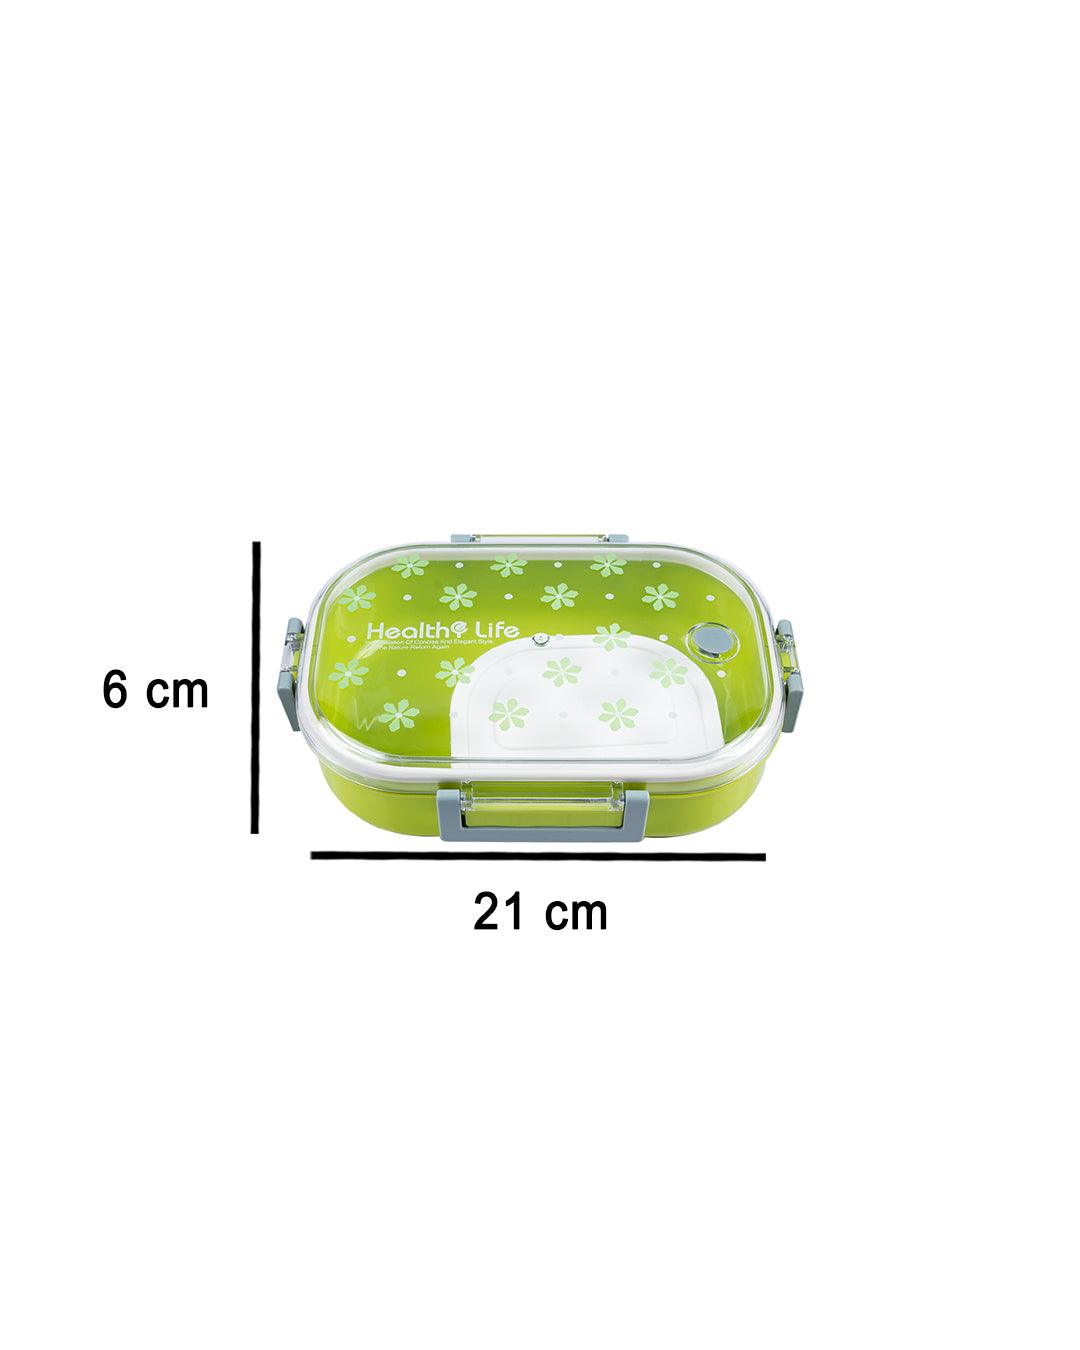 Lunch Box, Floral Print, Green, Plastic - MARKET 99